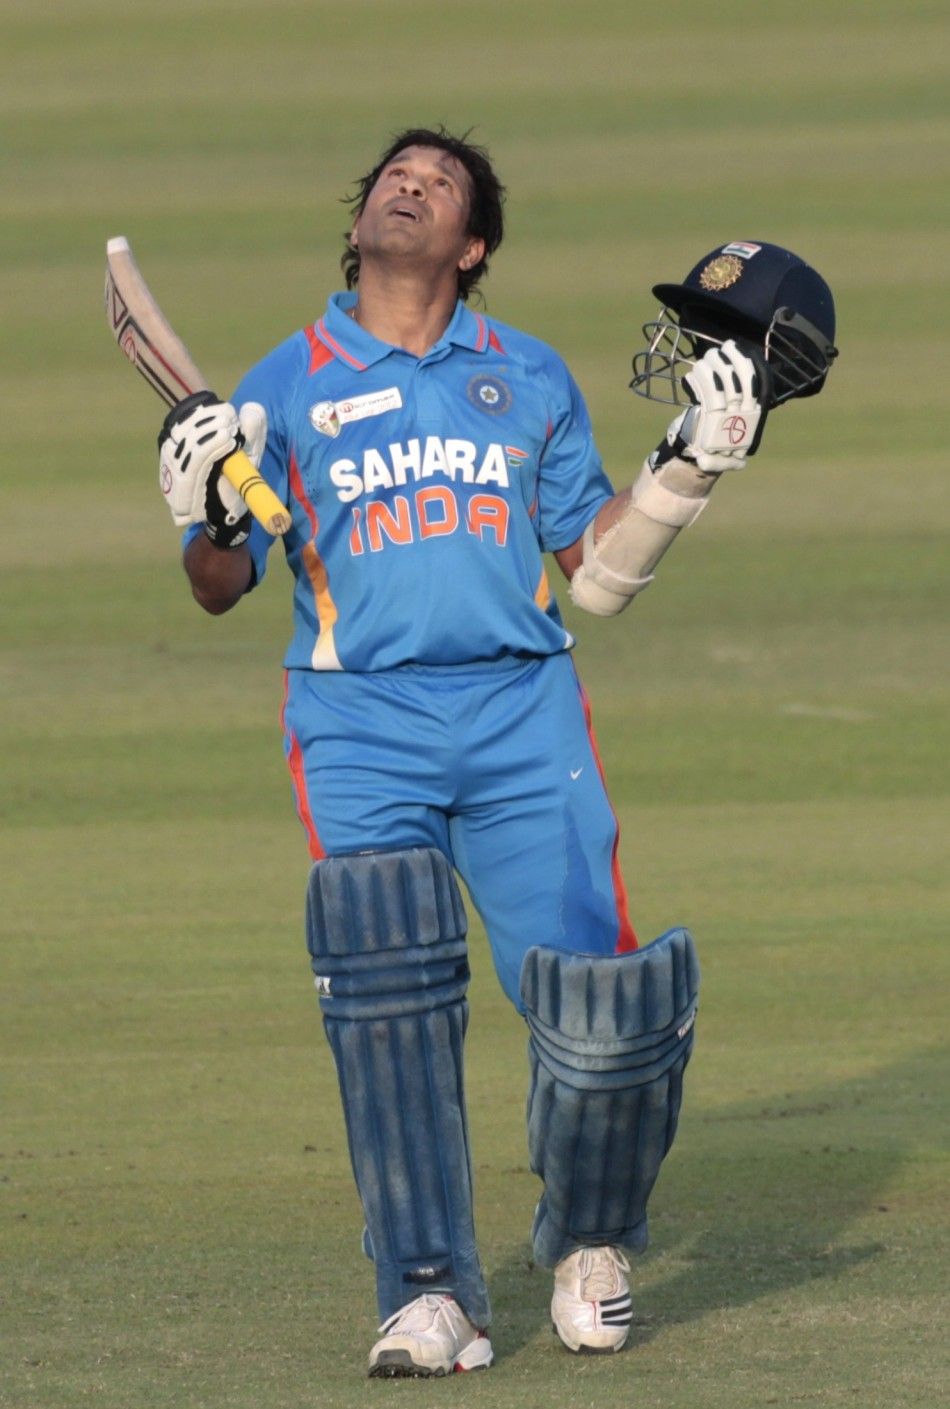 Indias Sachin Tendulkar celebrates after he scored his 100th centuries against Bangladesh during their One Day International ODI cricket match of Asia Cup in Dhaka March 16, 2012.